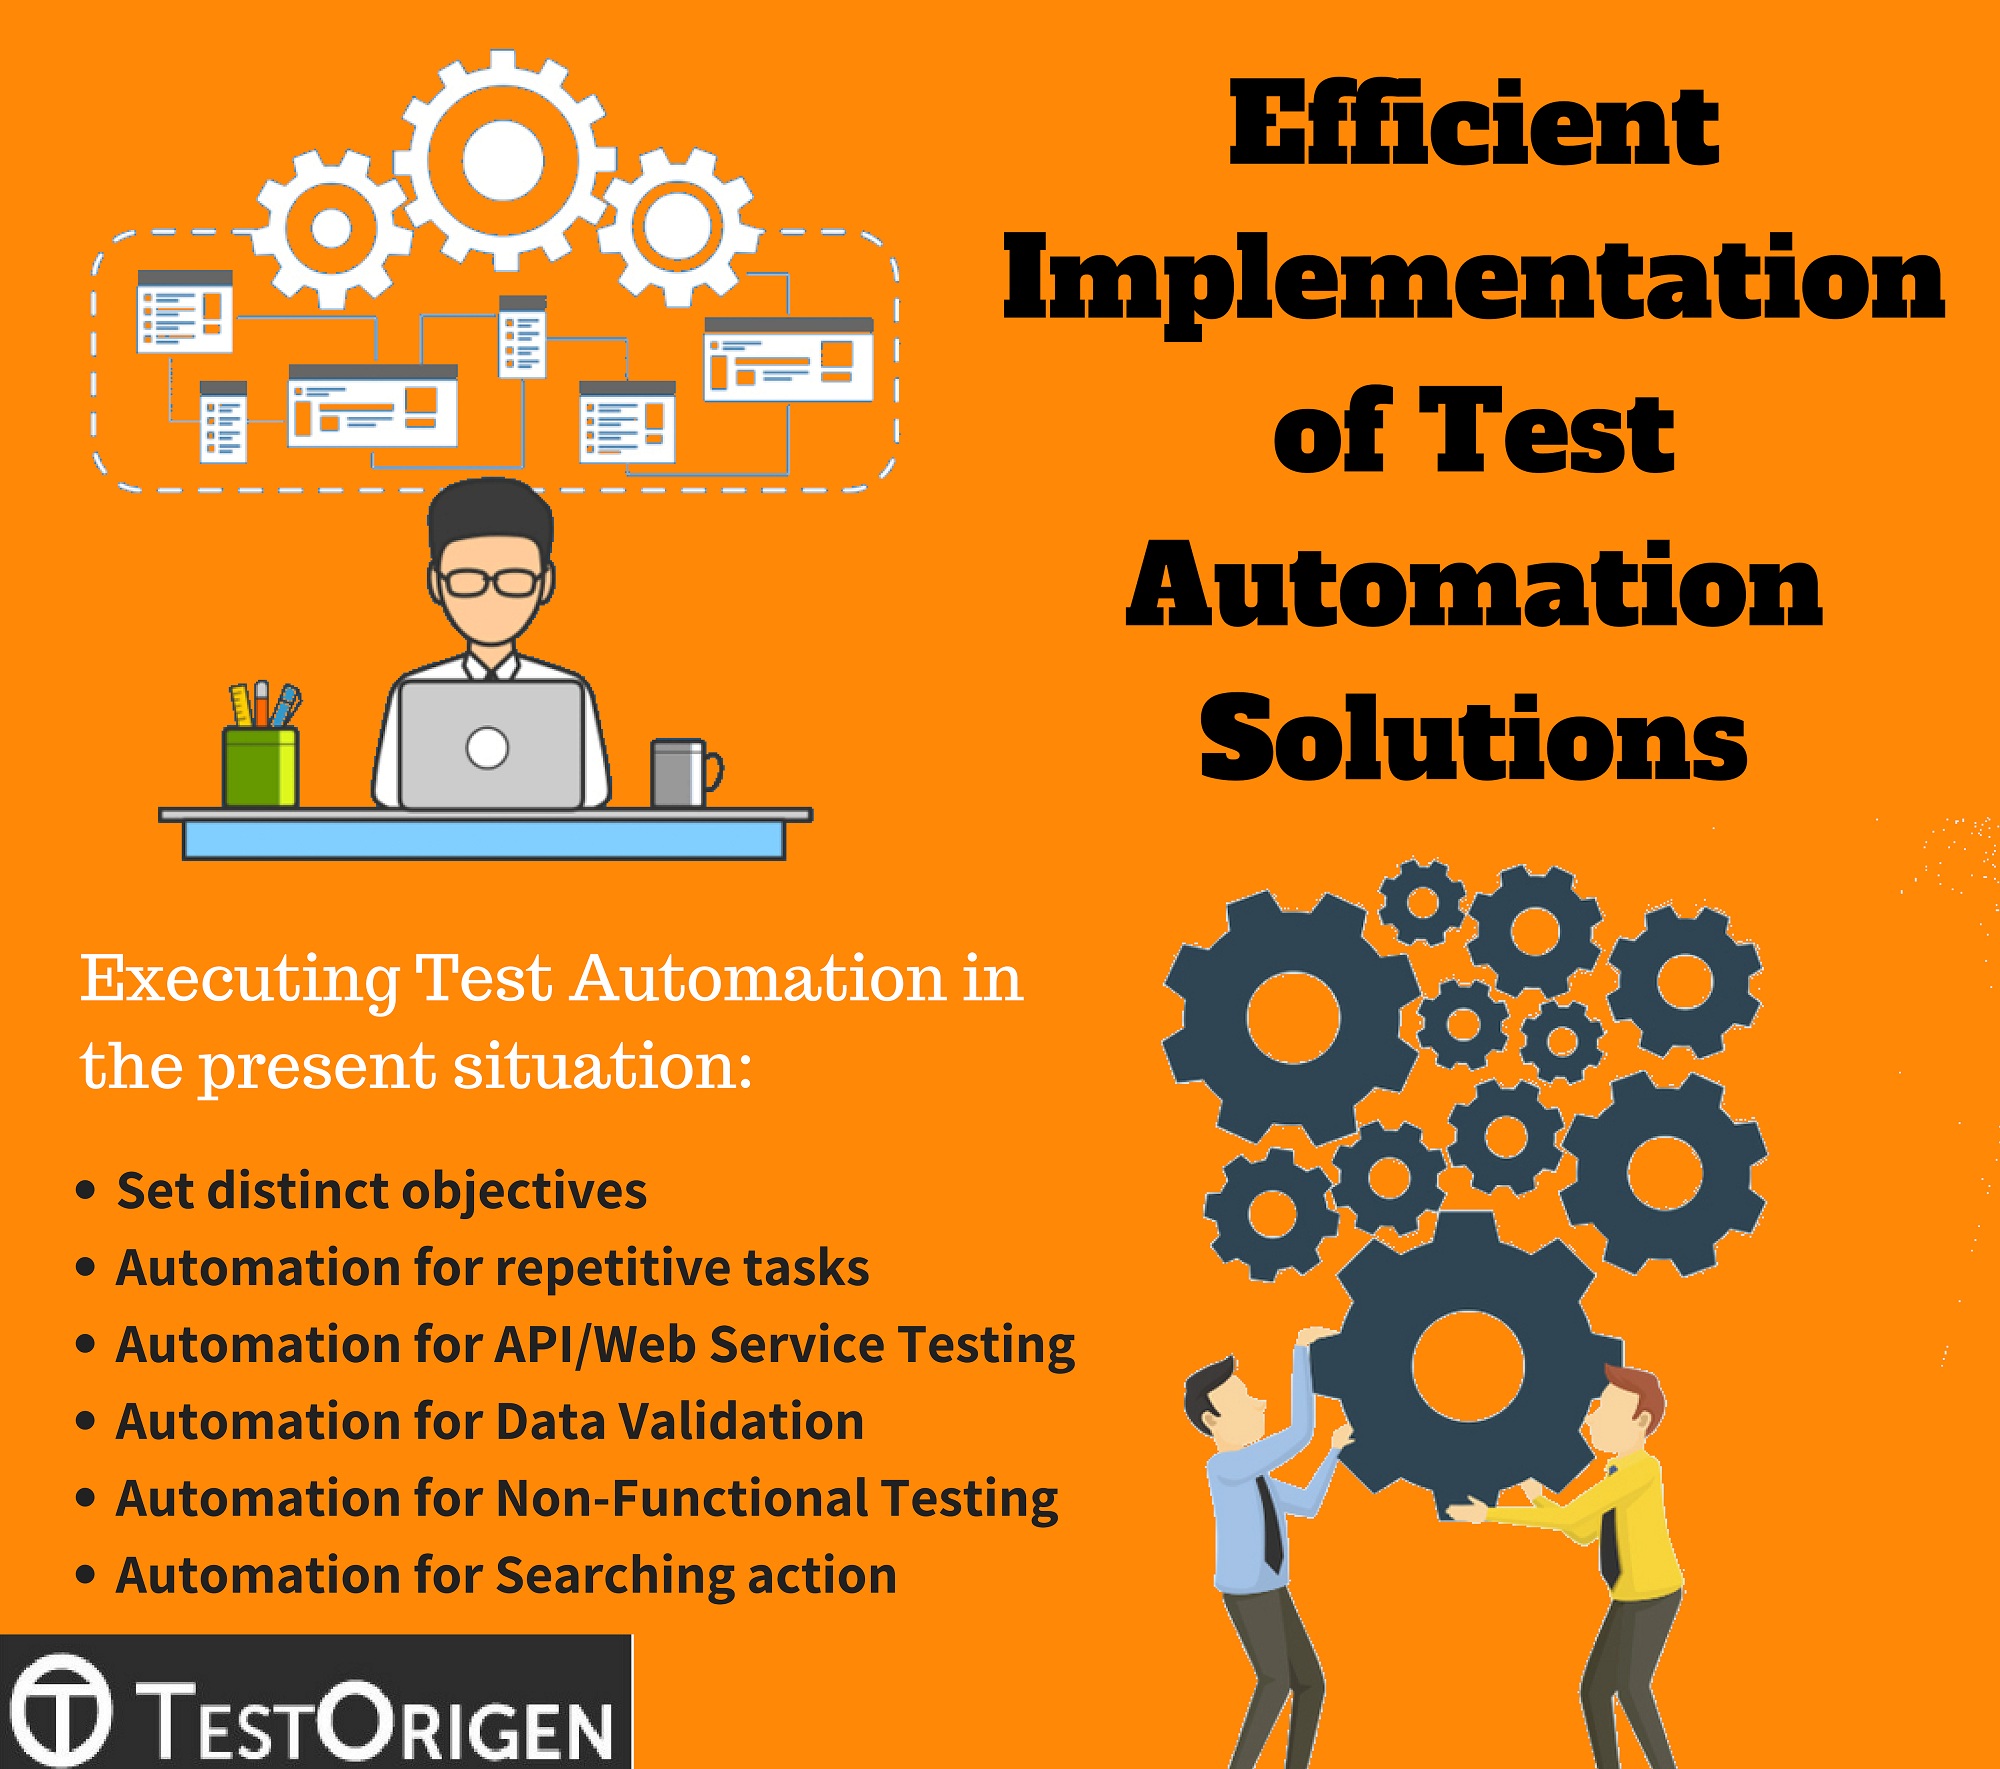 Efficient Implementation of Test Automation Solutions